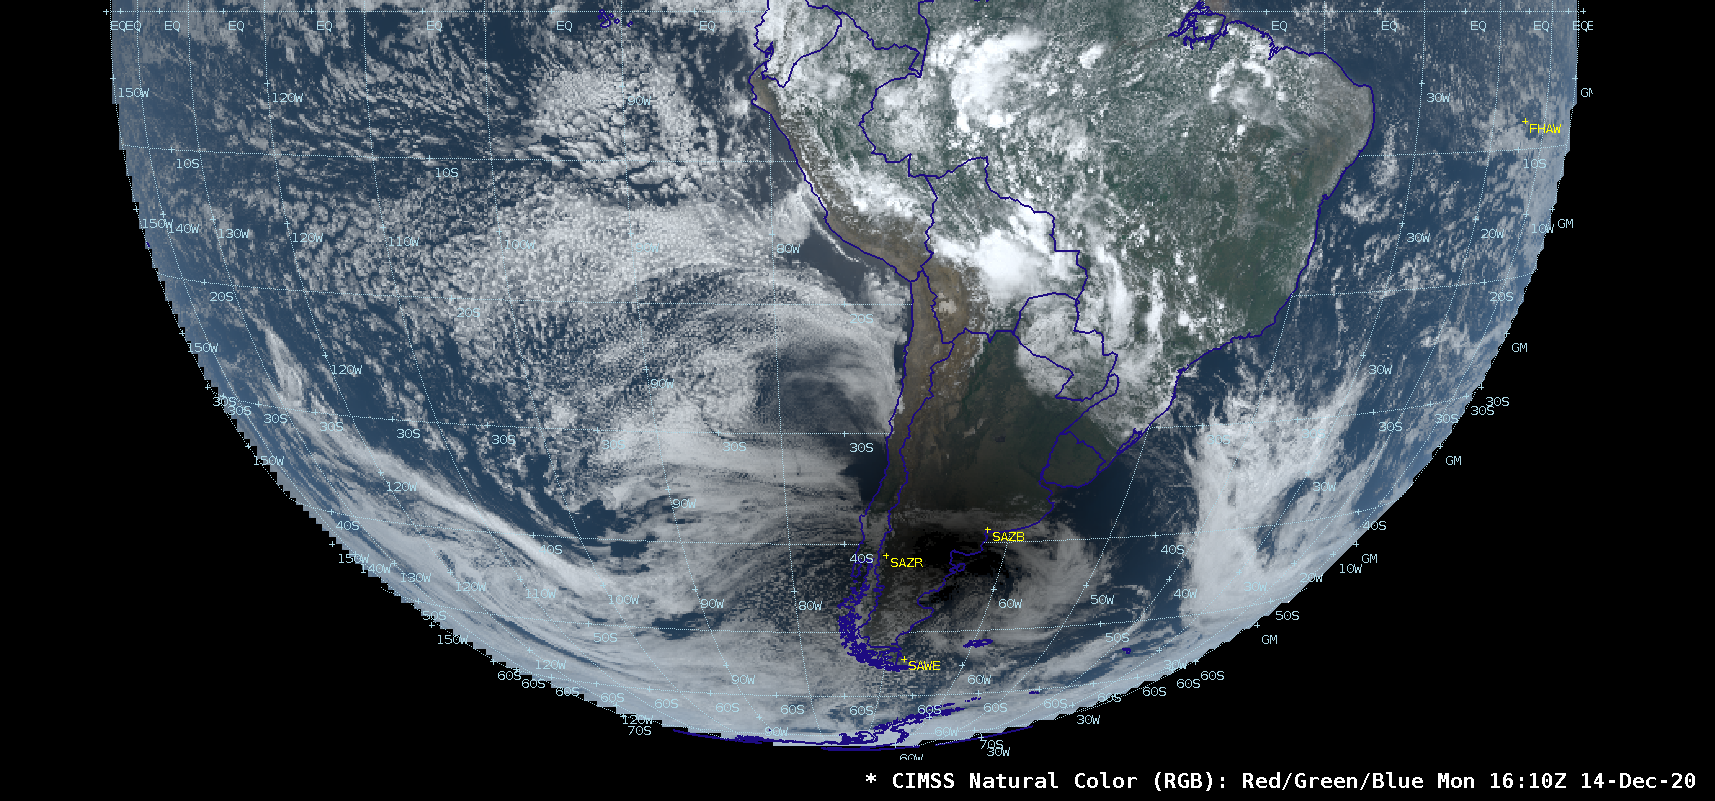 GOES-16 CIMSS Natural Color RGB images [click to play animation | MP4]